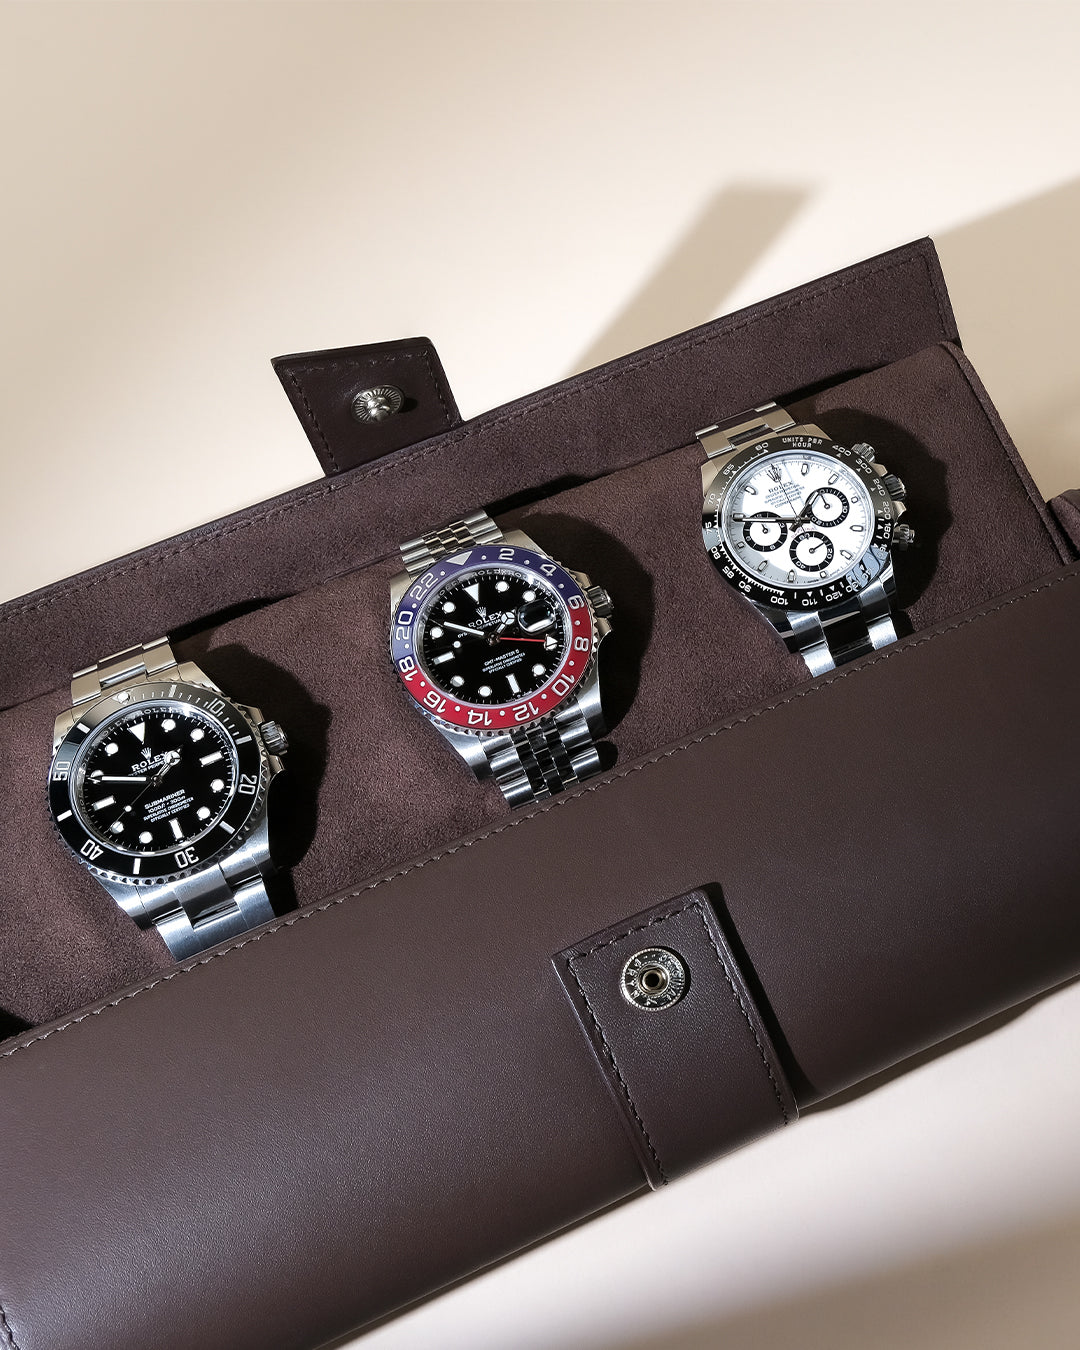 The History of Rolex: From Humble Beginnings to Iconic Status